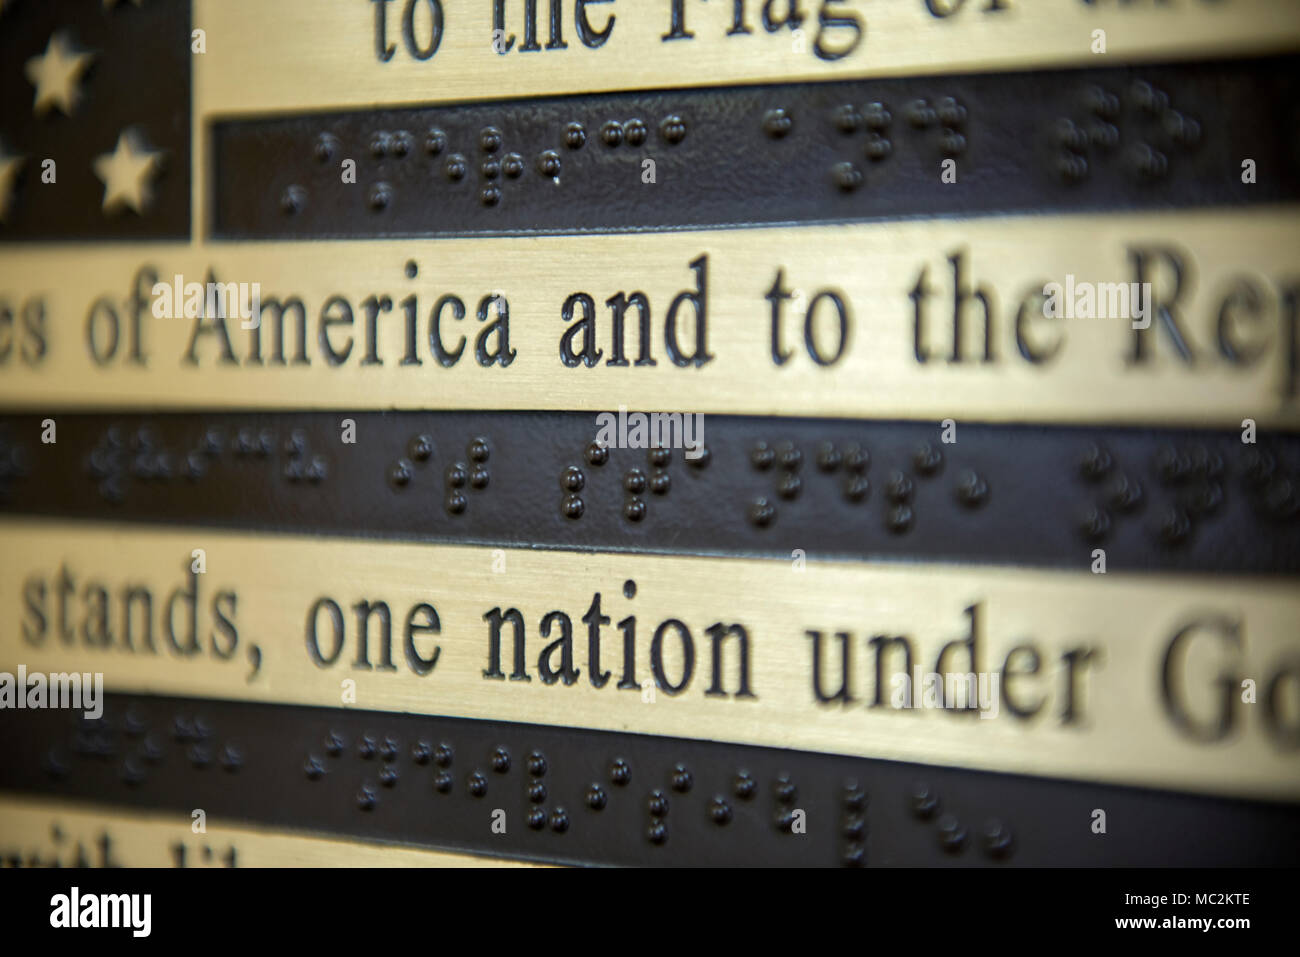 The American Braille tactile flag in the Welcome Center at Arlington National Cemetery, Arlington, Virginia, Jan. 26, 2018.  In 2008, the 110th Congress passed H.R. 4169, which authorized the placement of the Braille Flag at ANC in honor of blind members of the Armed Forces, veterans, and other Americans.  The Braille Flag can be found inside the ANC Welcome Center near the Arlington Tours ticket center.  (U.S. Army photo by Elizabeth Fraser / Arlington National Cemetery / released) Stock Photo